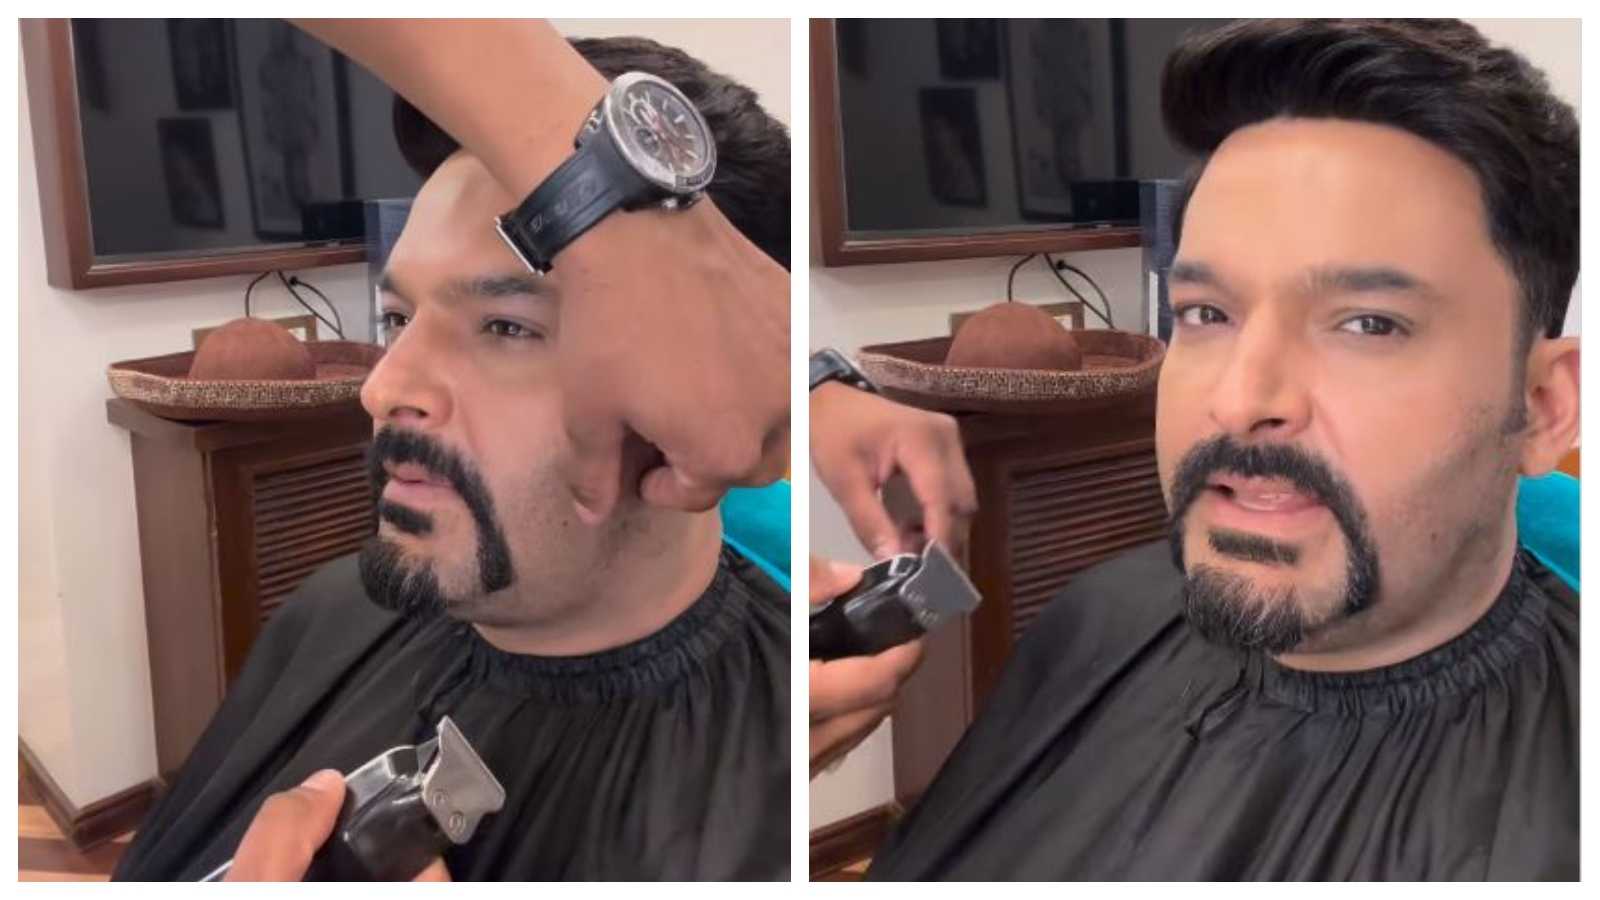 Kapil Sharma unveils his new look in a hilarious video; asks fans 'Guys am I looking Italian?'